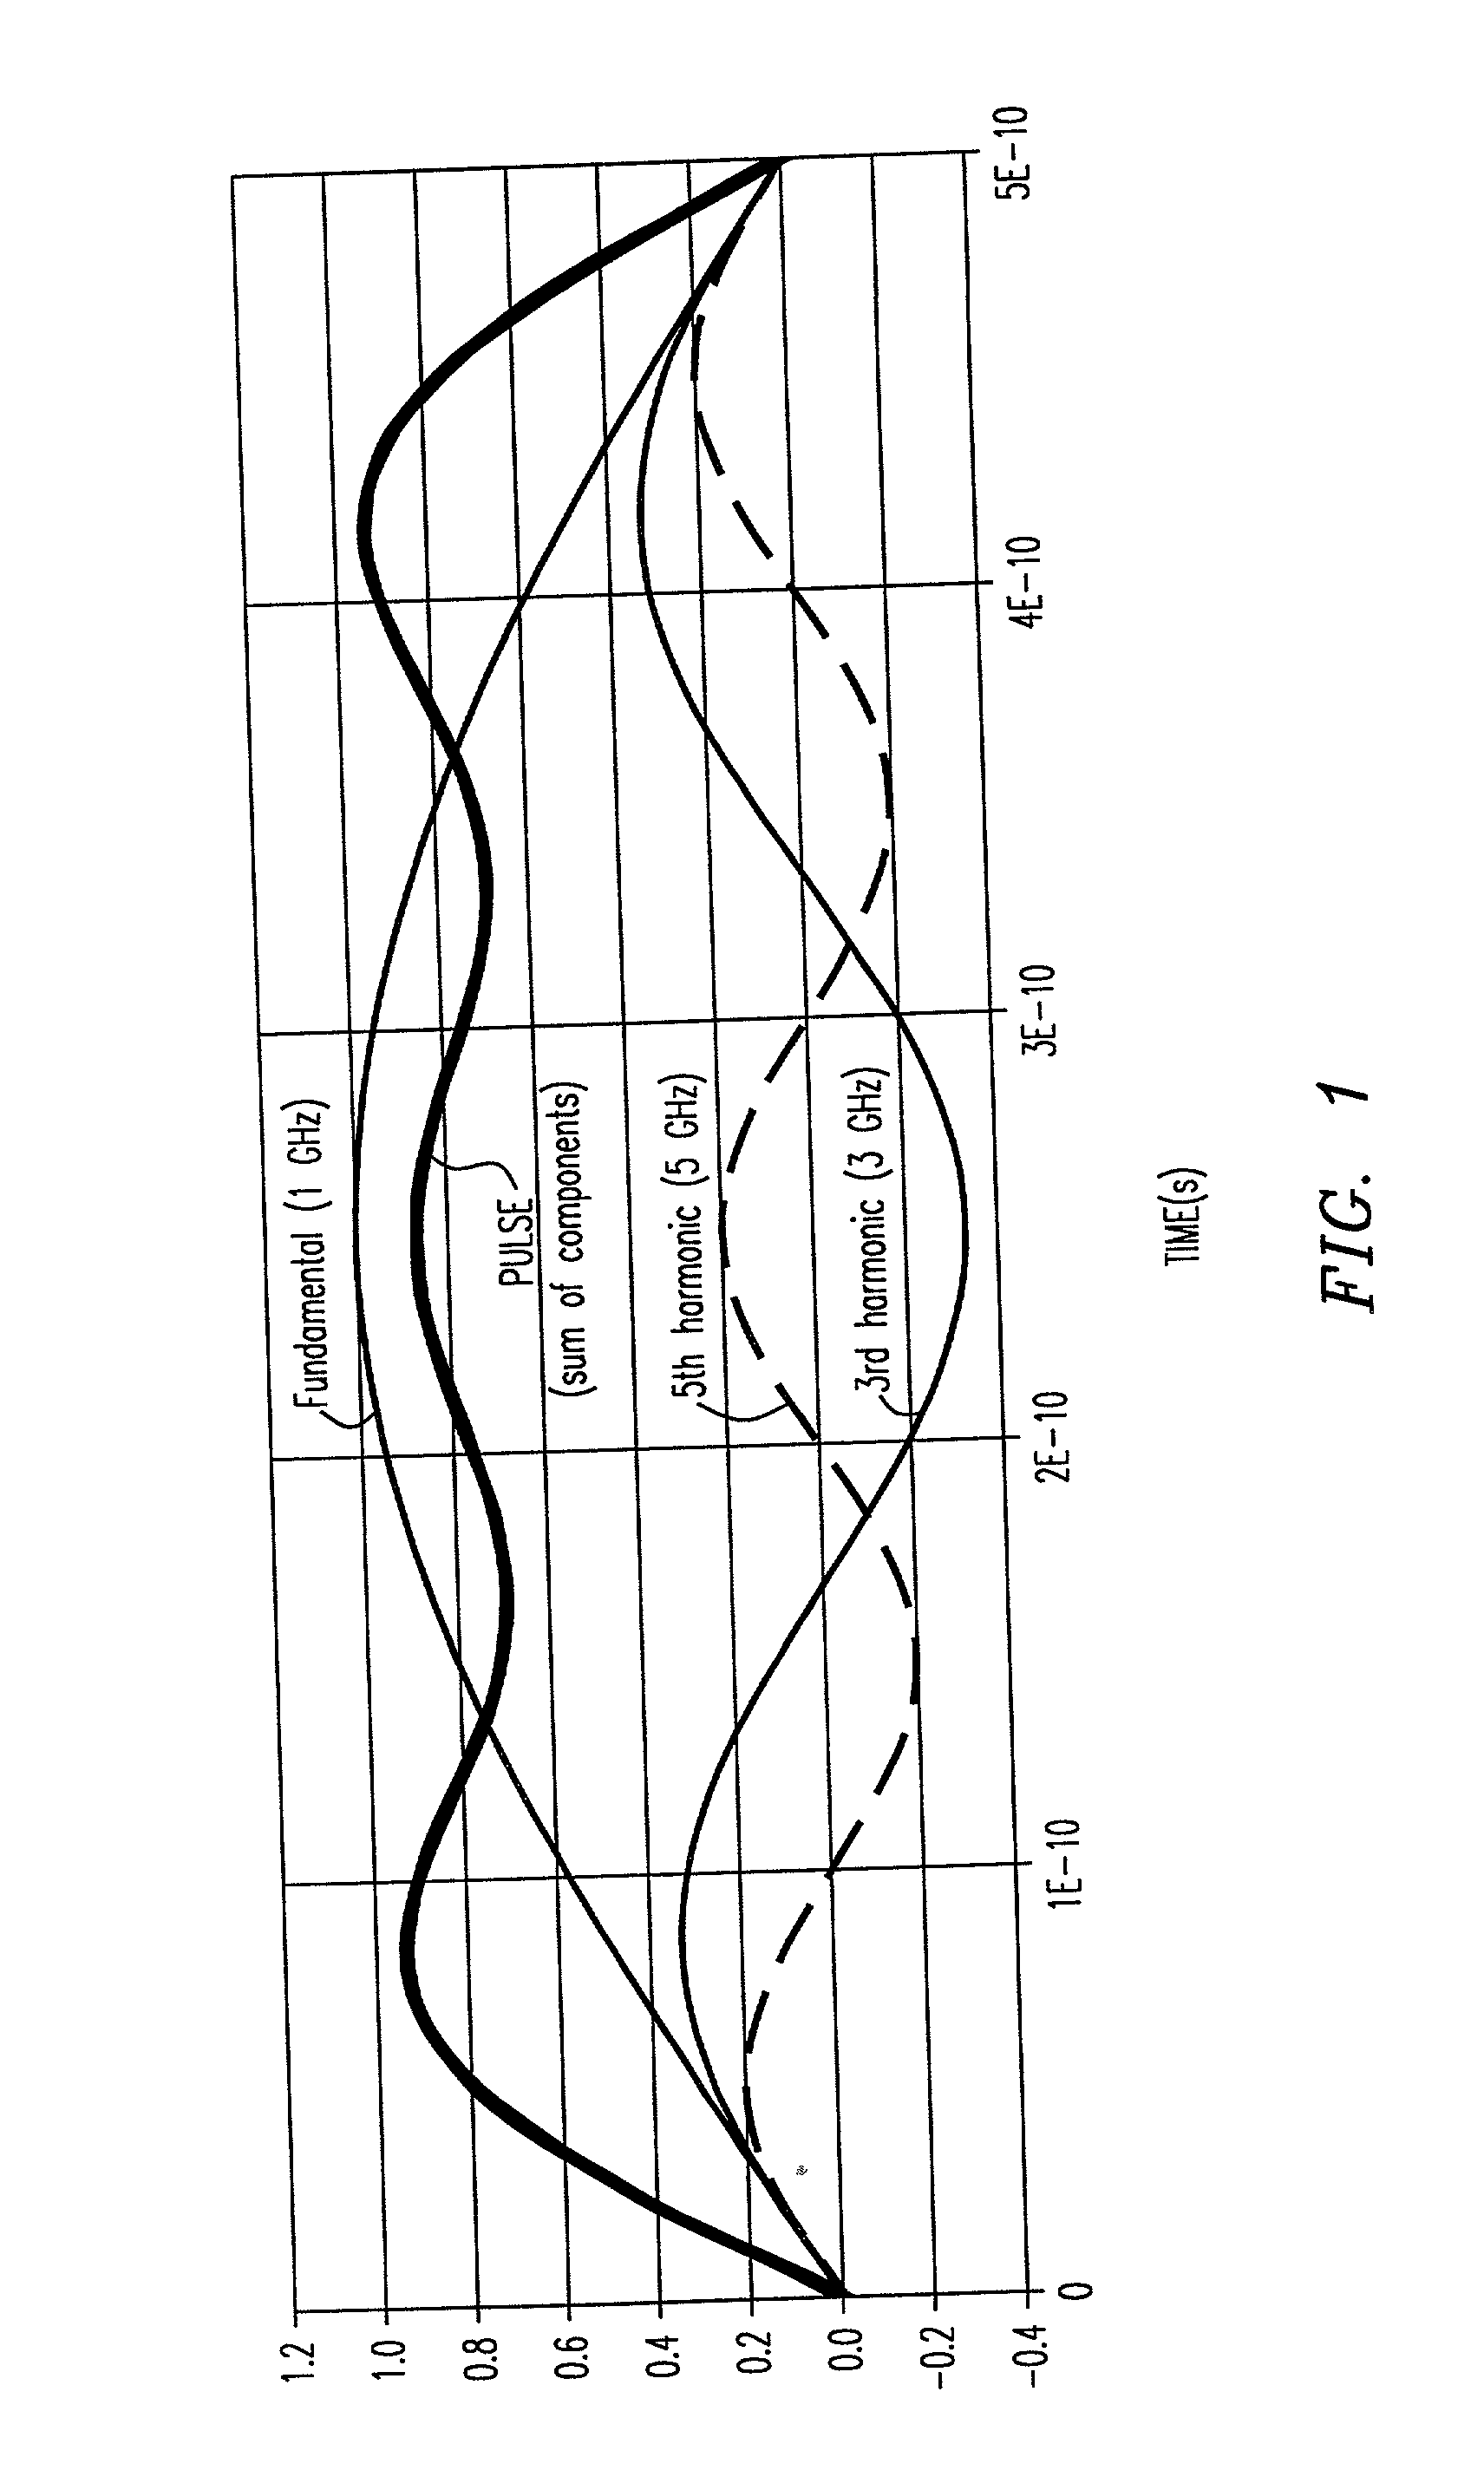 Group delay equalizer integrated with a wideband distributed amplifier monolithic microwave integrated circuit